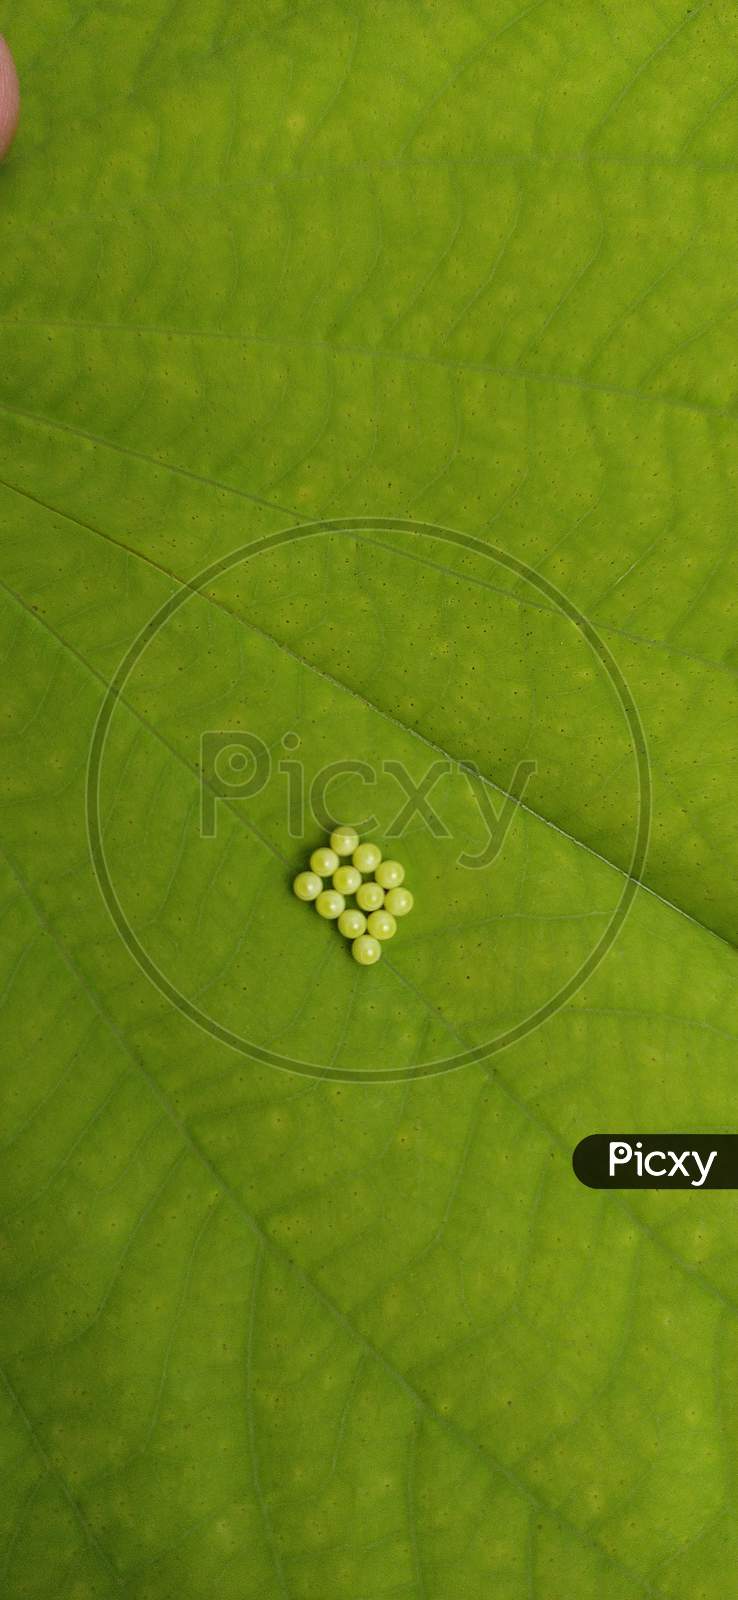 Close up view of eggs under a leaf